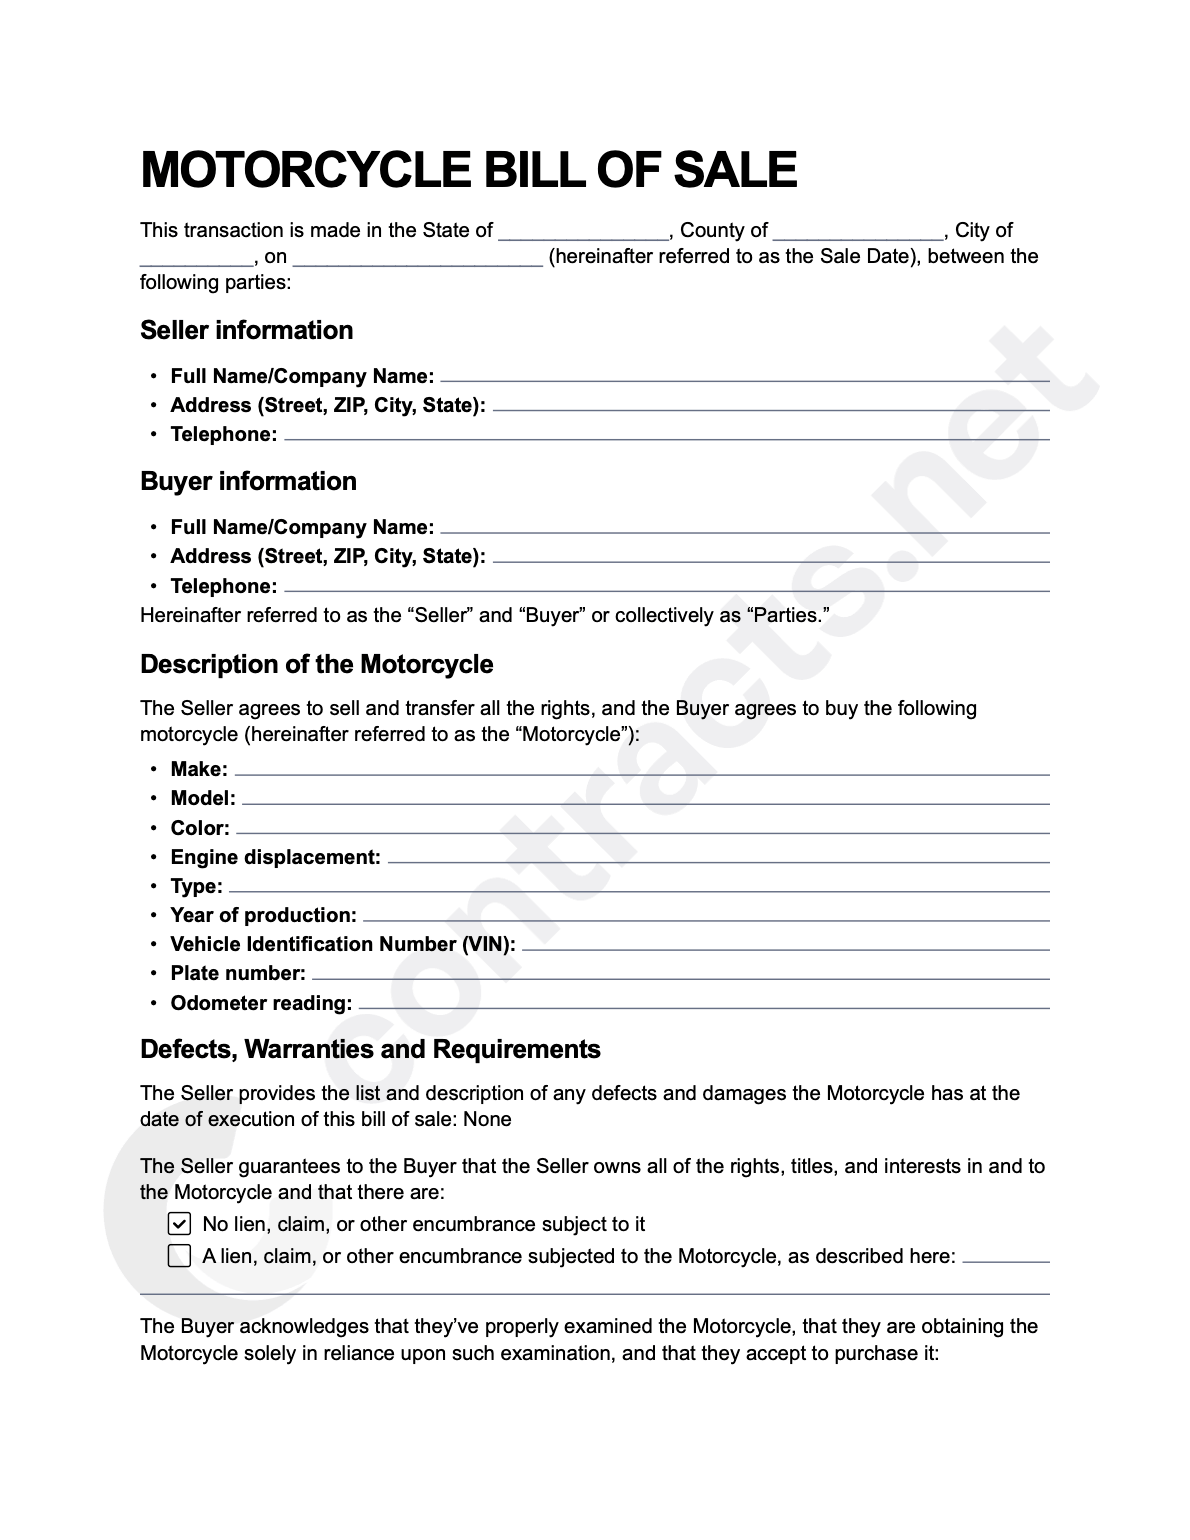 Motorcycle Bill of Sale Form [PDF]